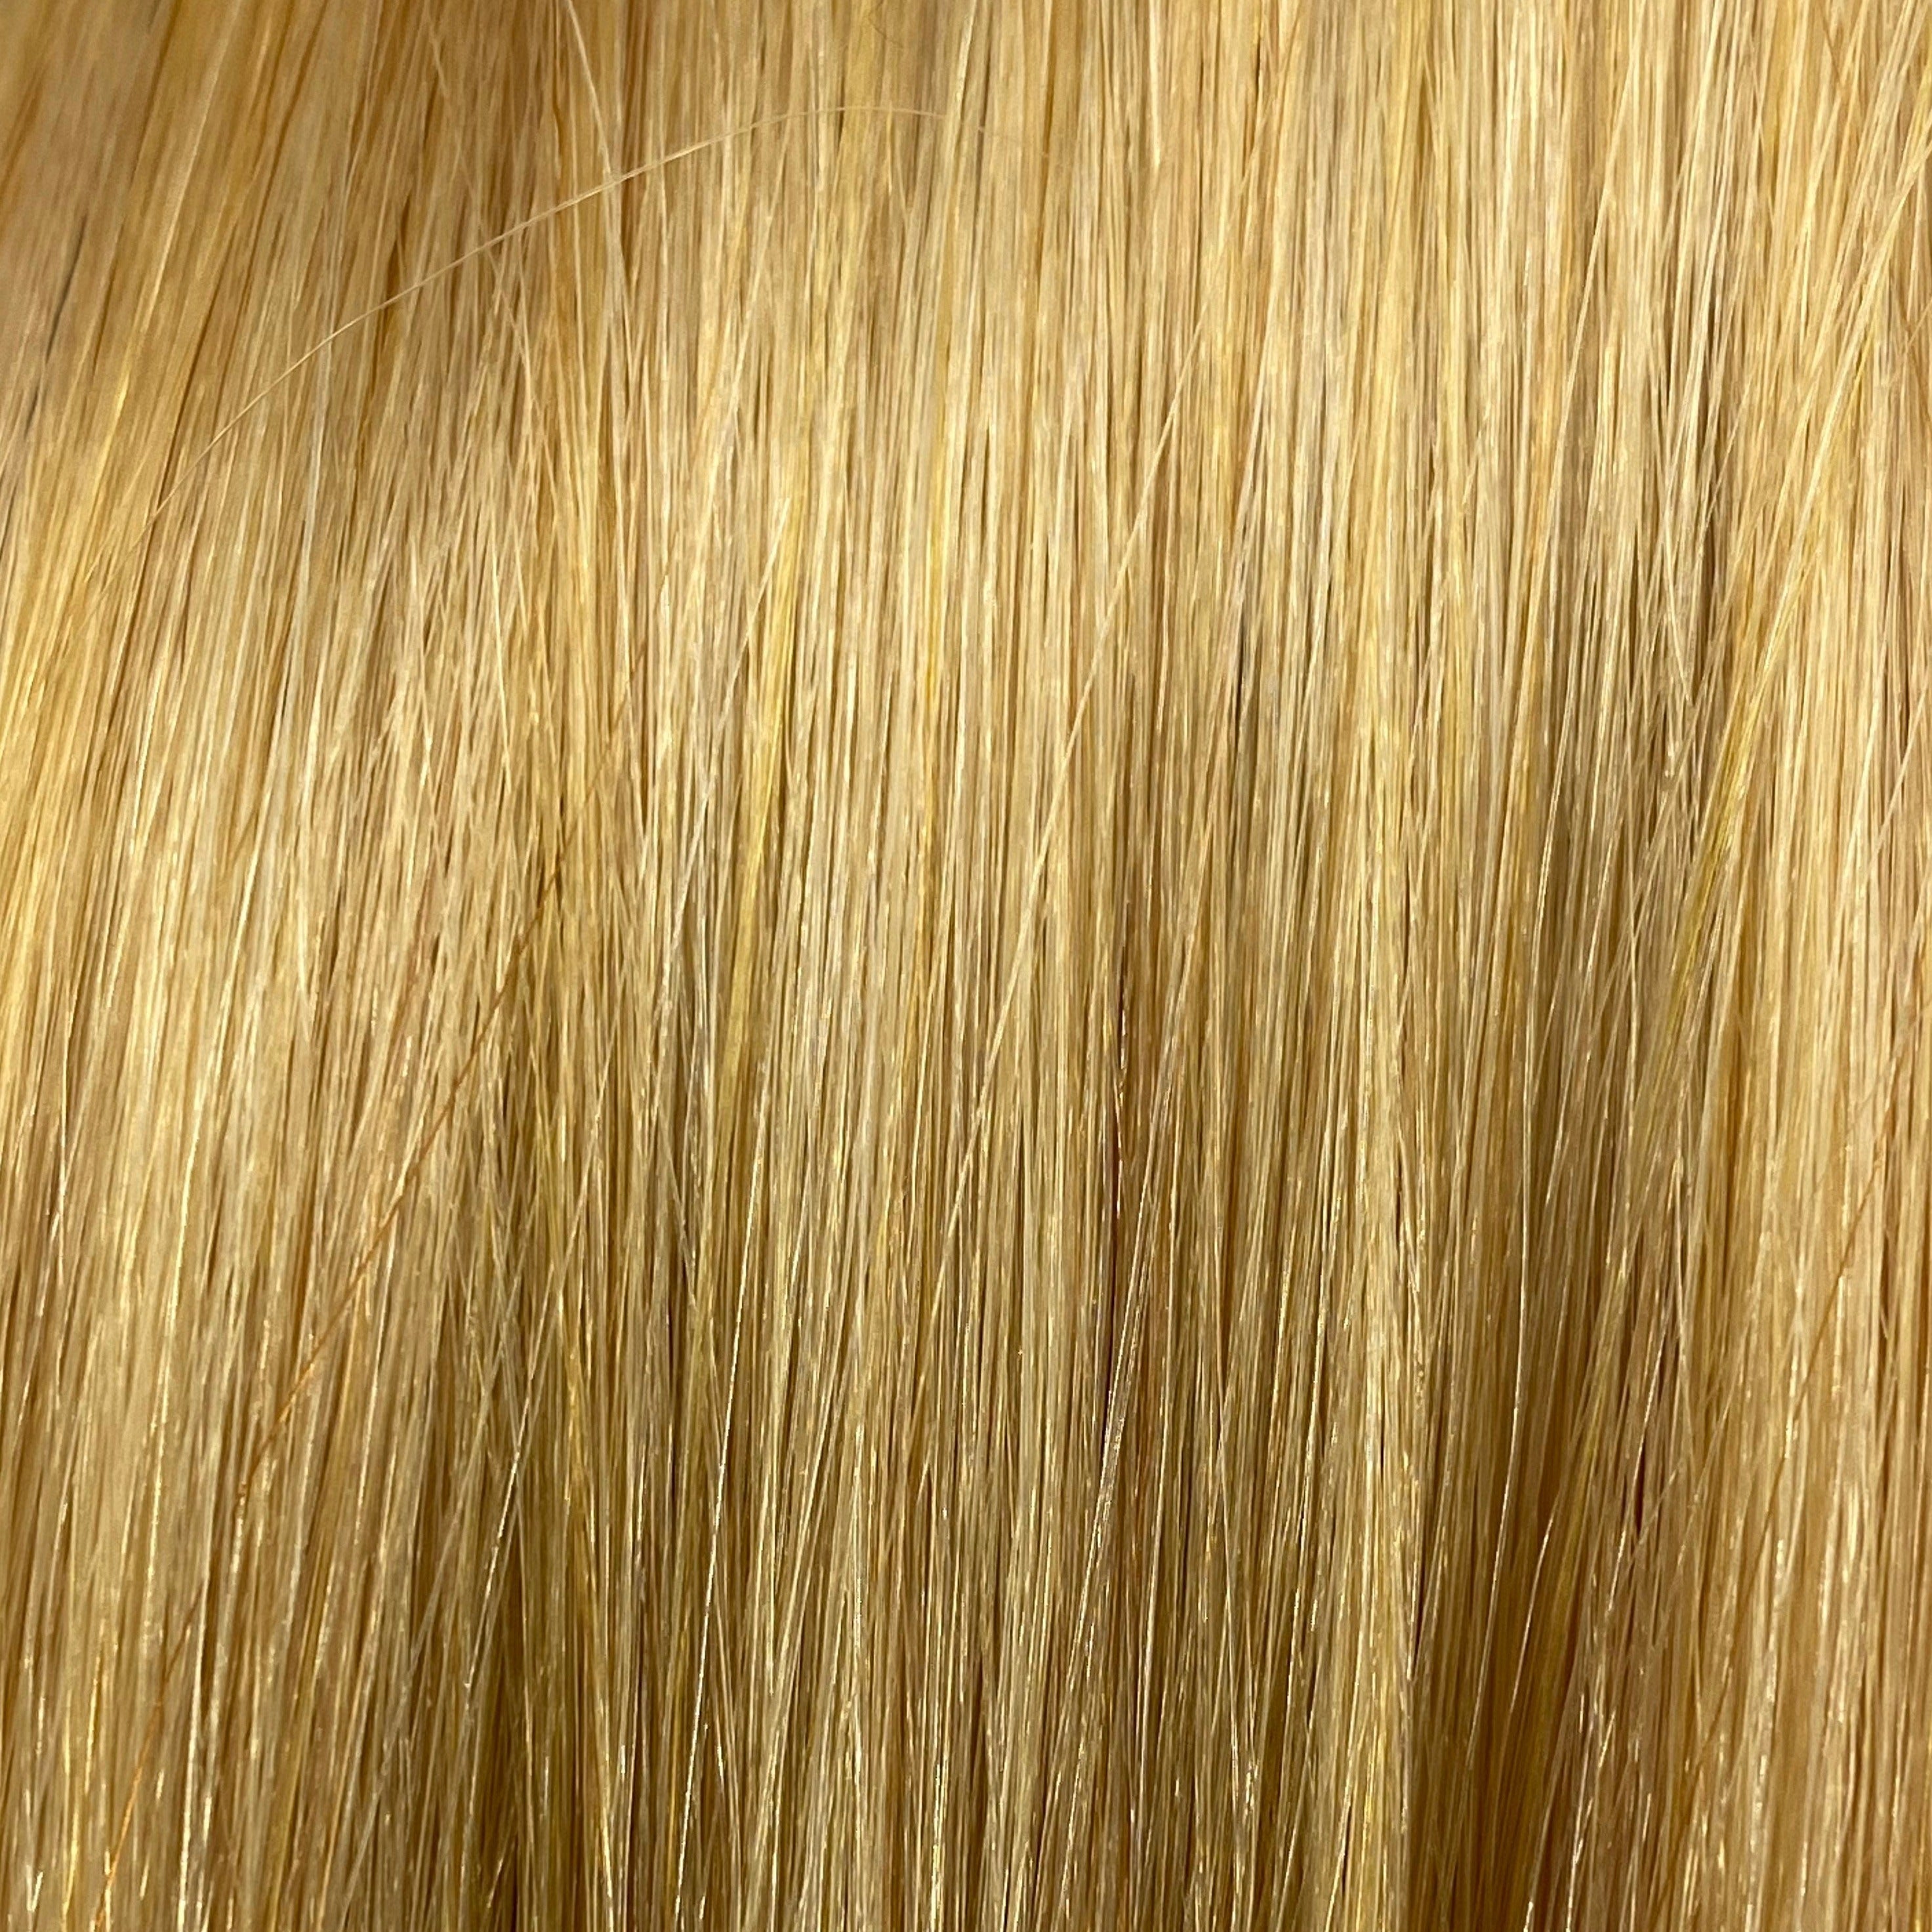 FUSION #20 VERY LIGHT ULTRA BLONDE 50CM/ 20 INCHES  -  20 GRAMS - Image 1